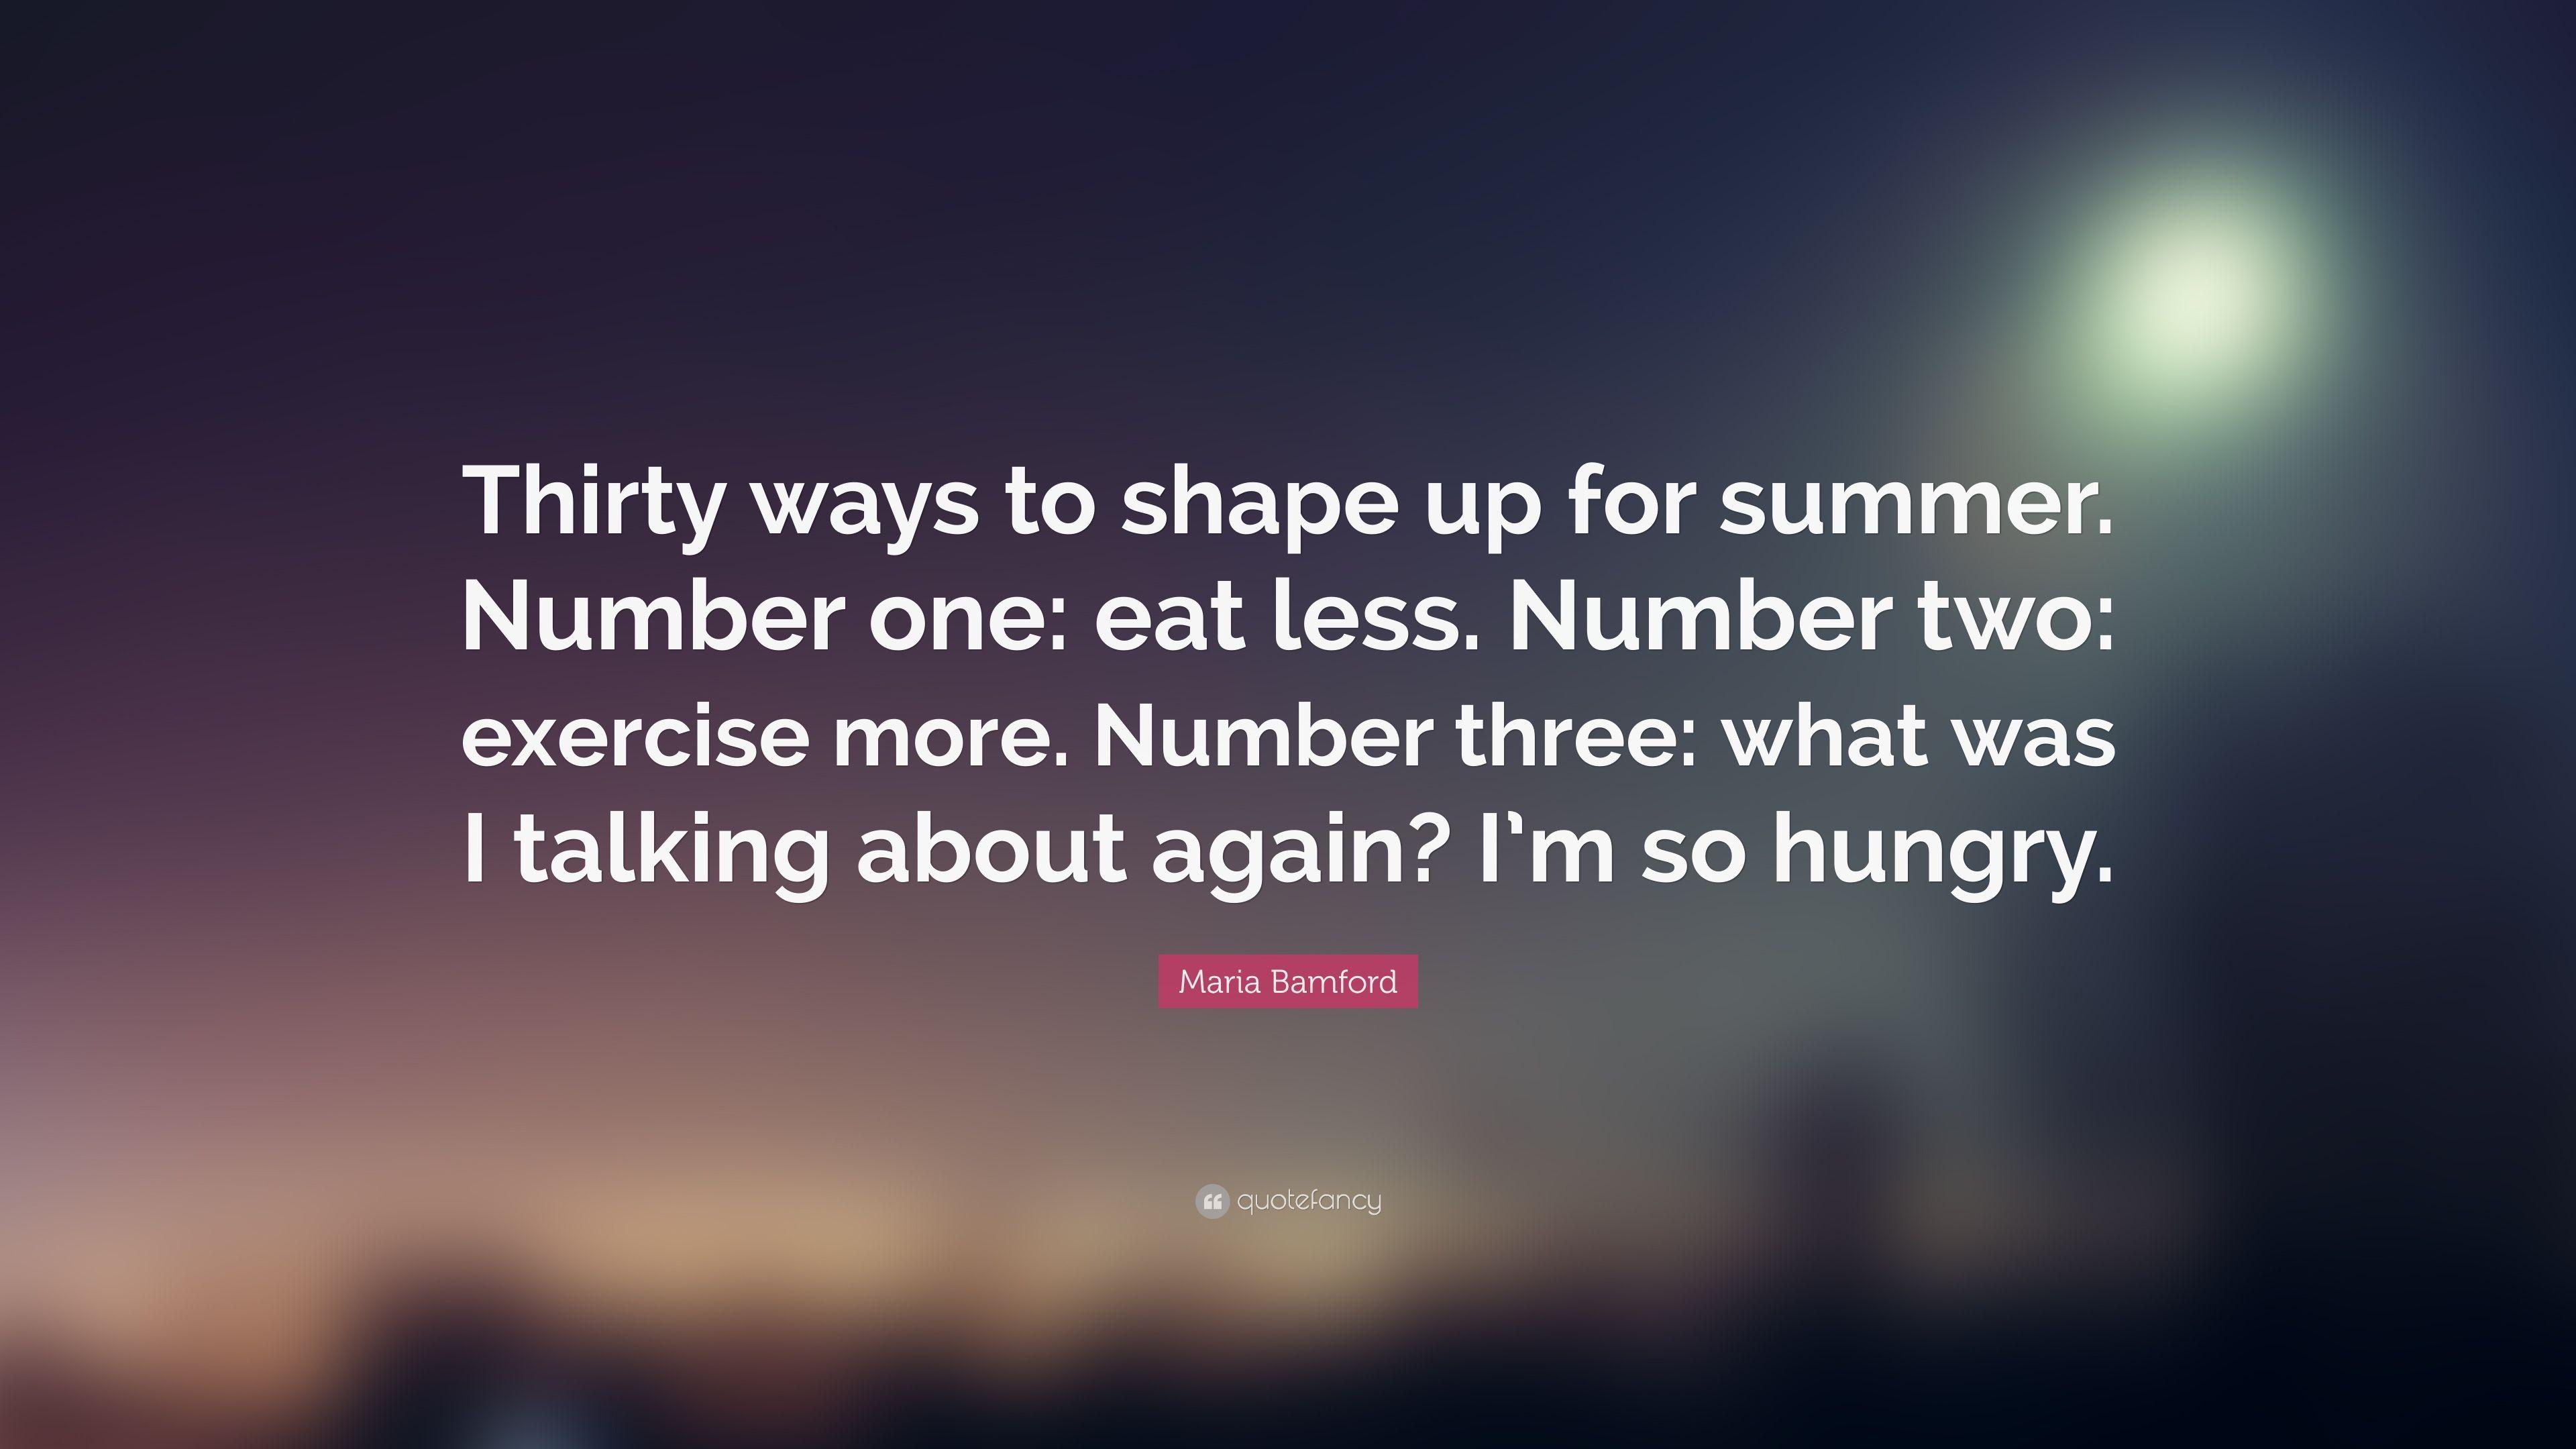 Maria Bamford Quote: “Thirty ways to shape up for summer. Number one